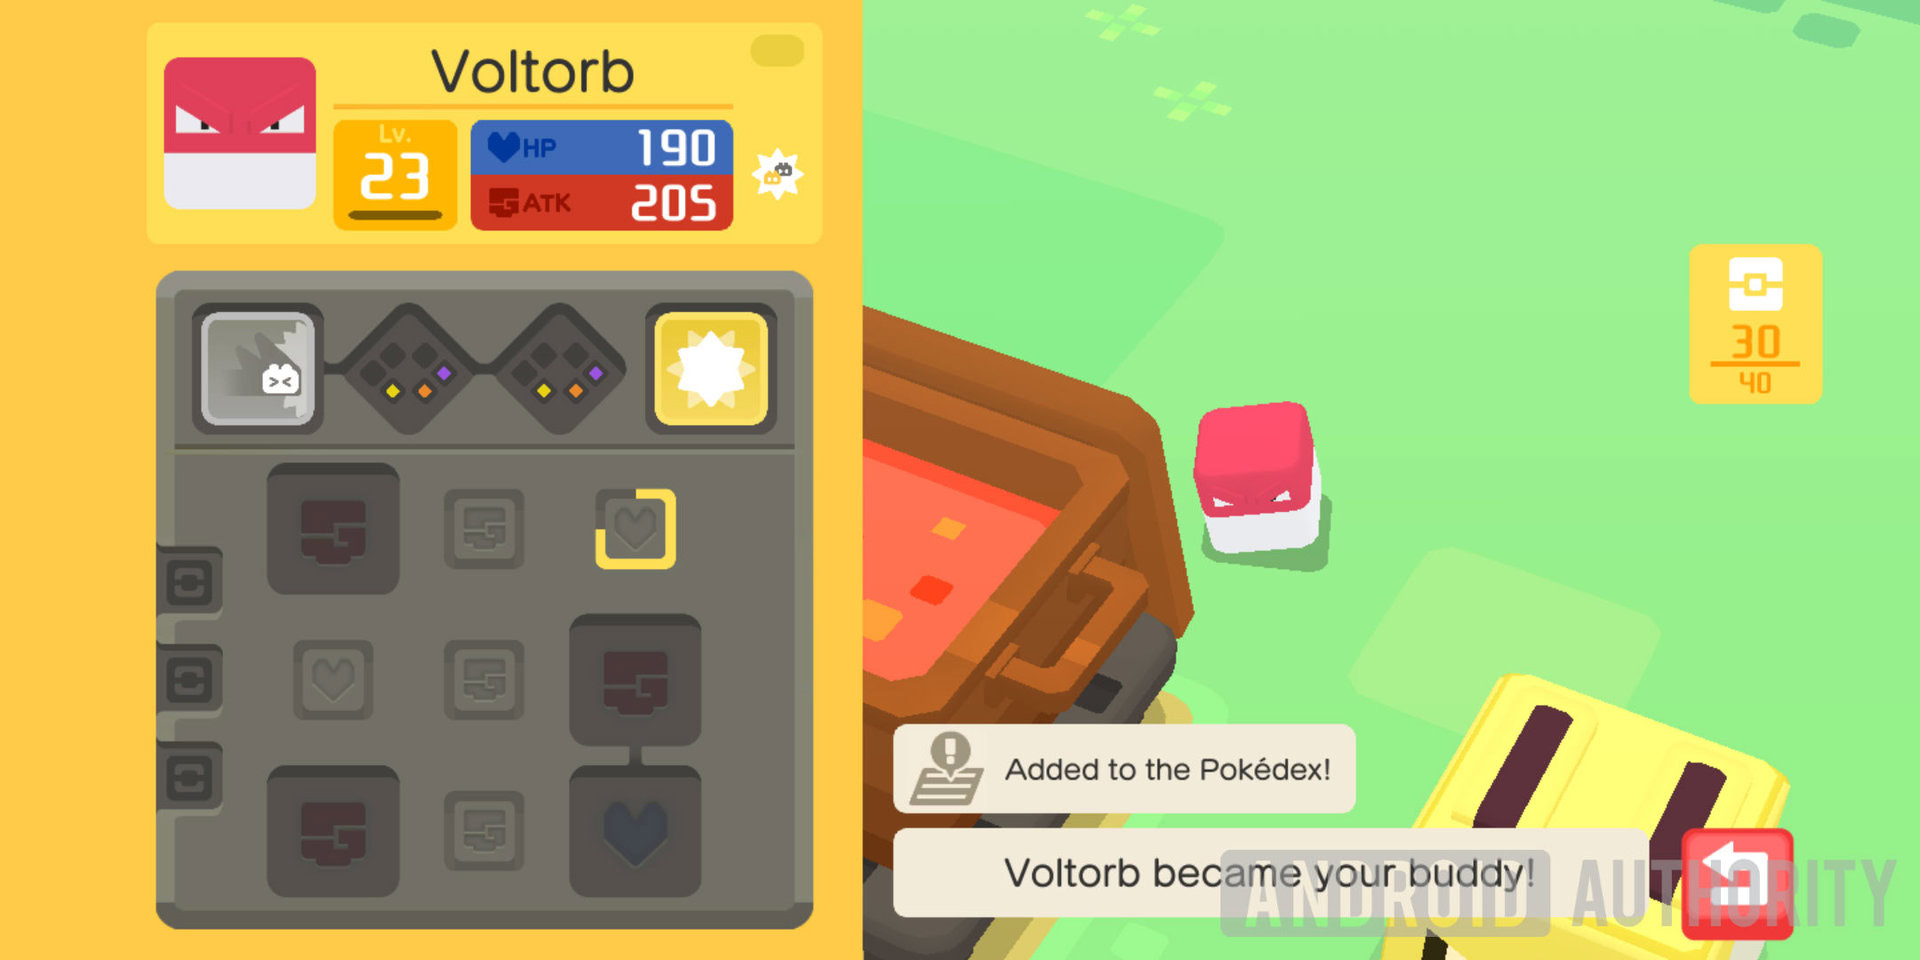 Pokémon Quest': Rock Your Block Off With These Tips, Tricks and